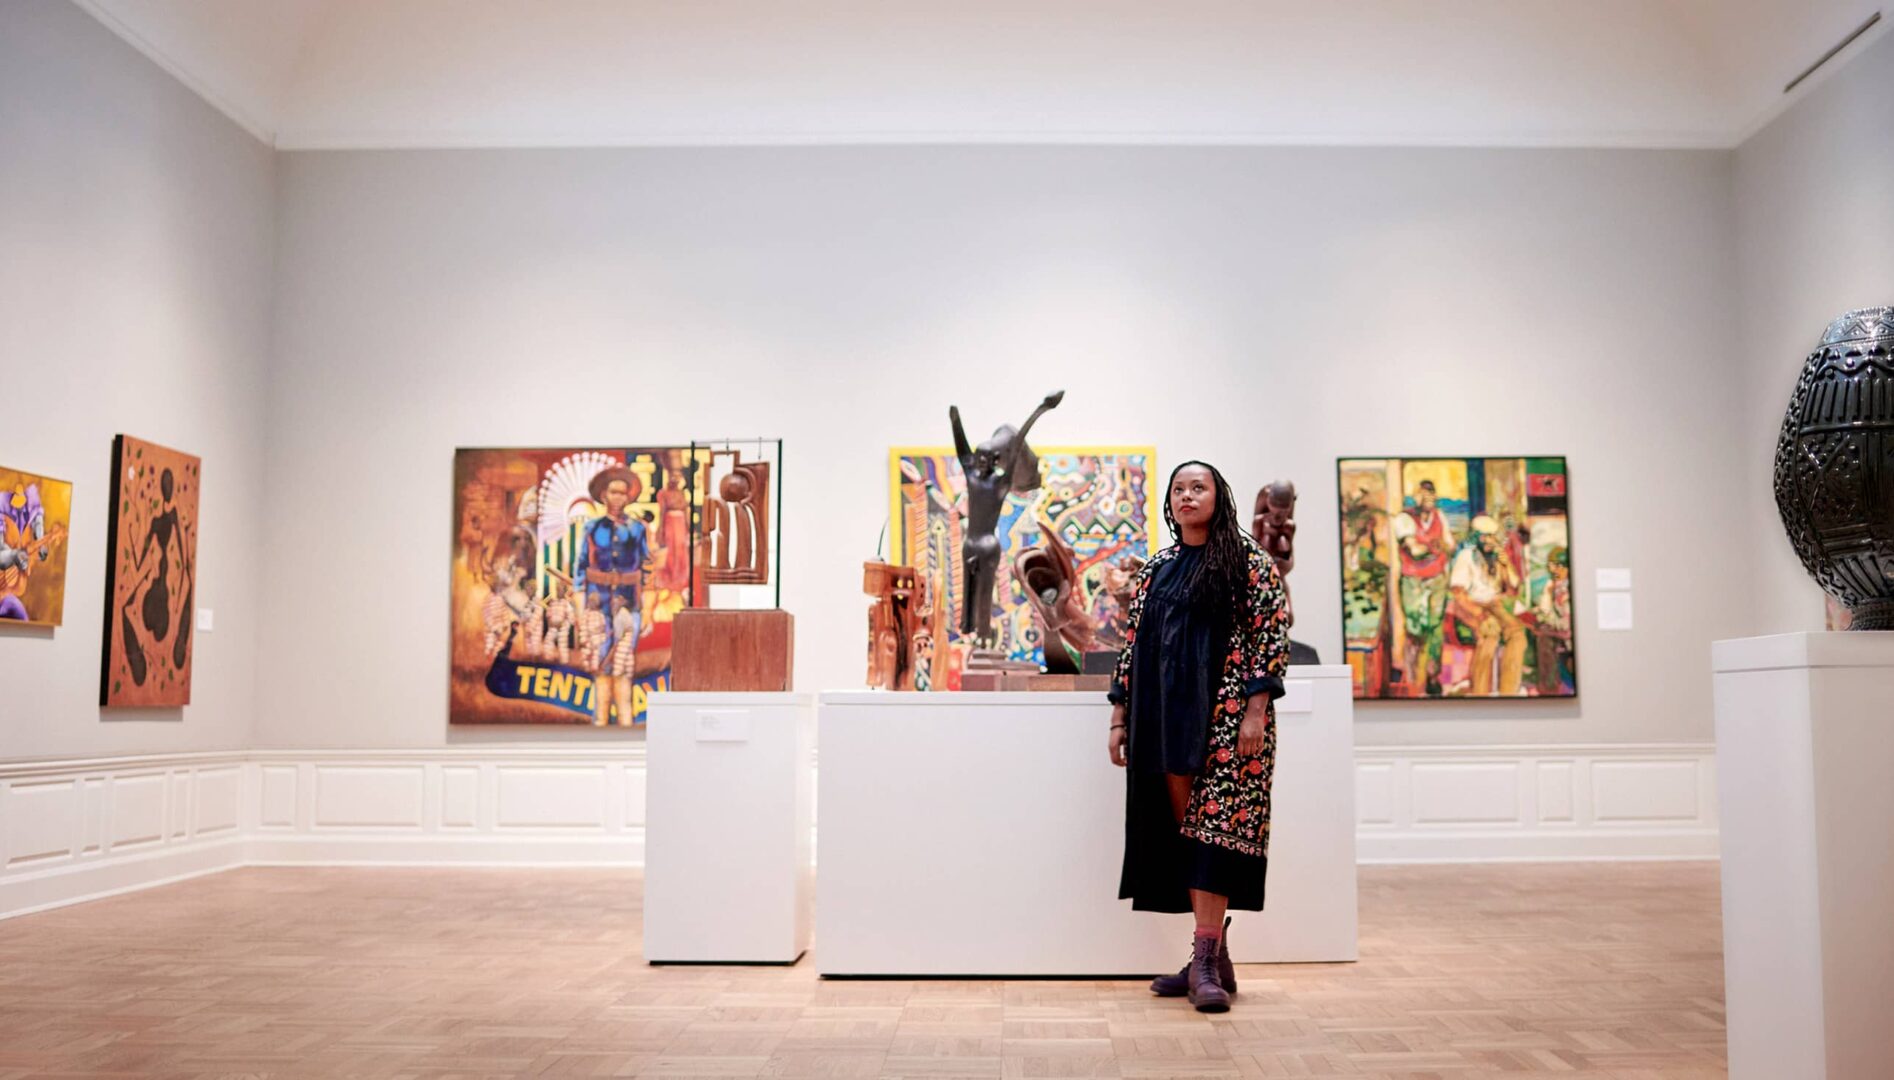 Person standing in gallery space surrounded by paintings and sculptures.